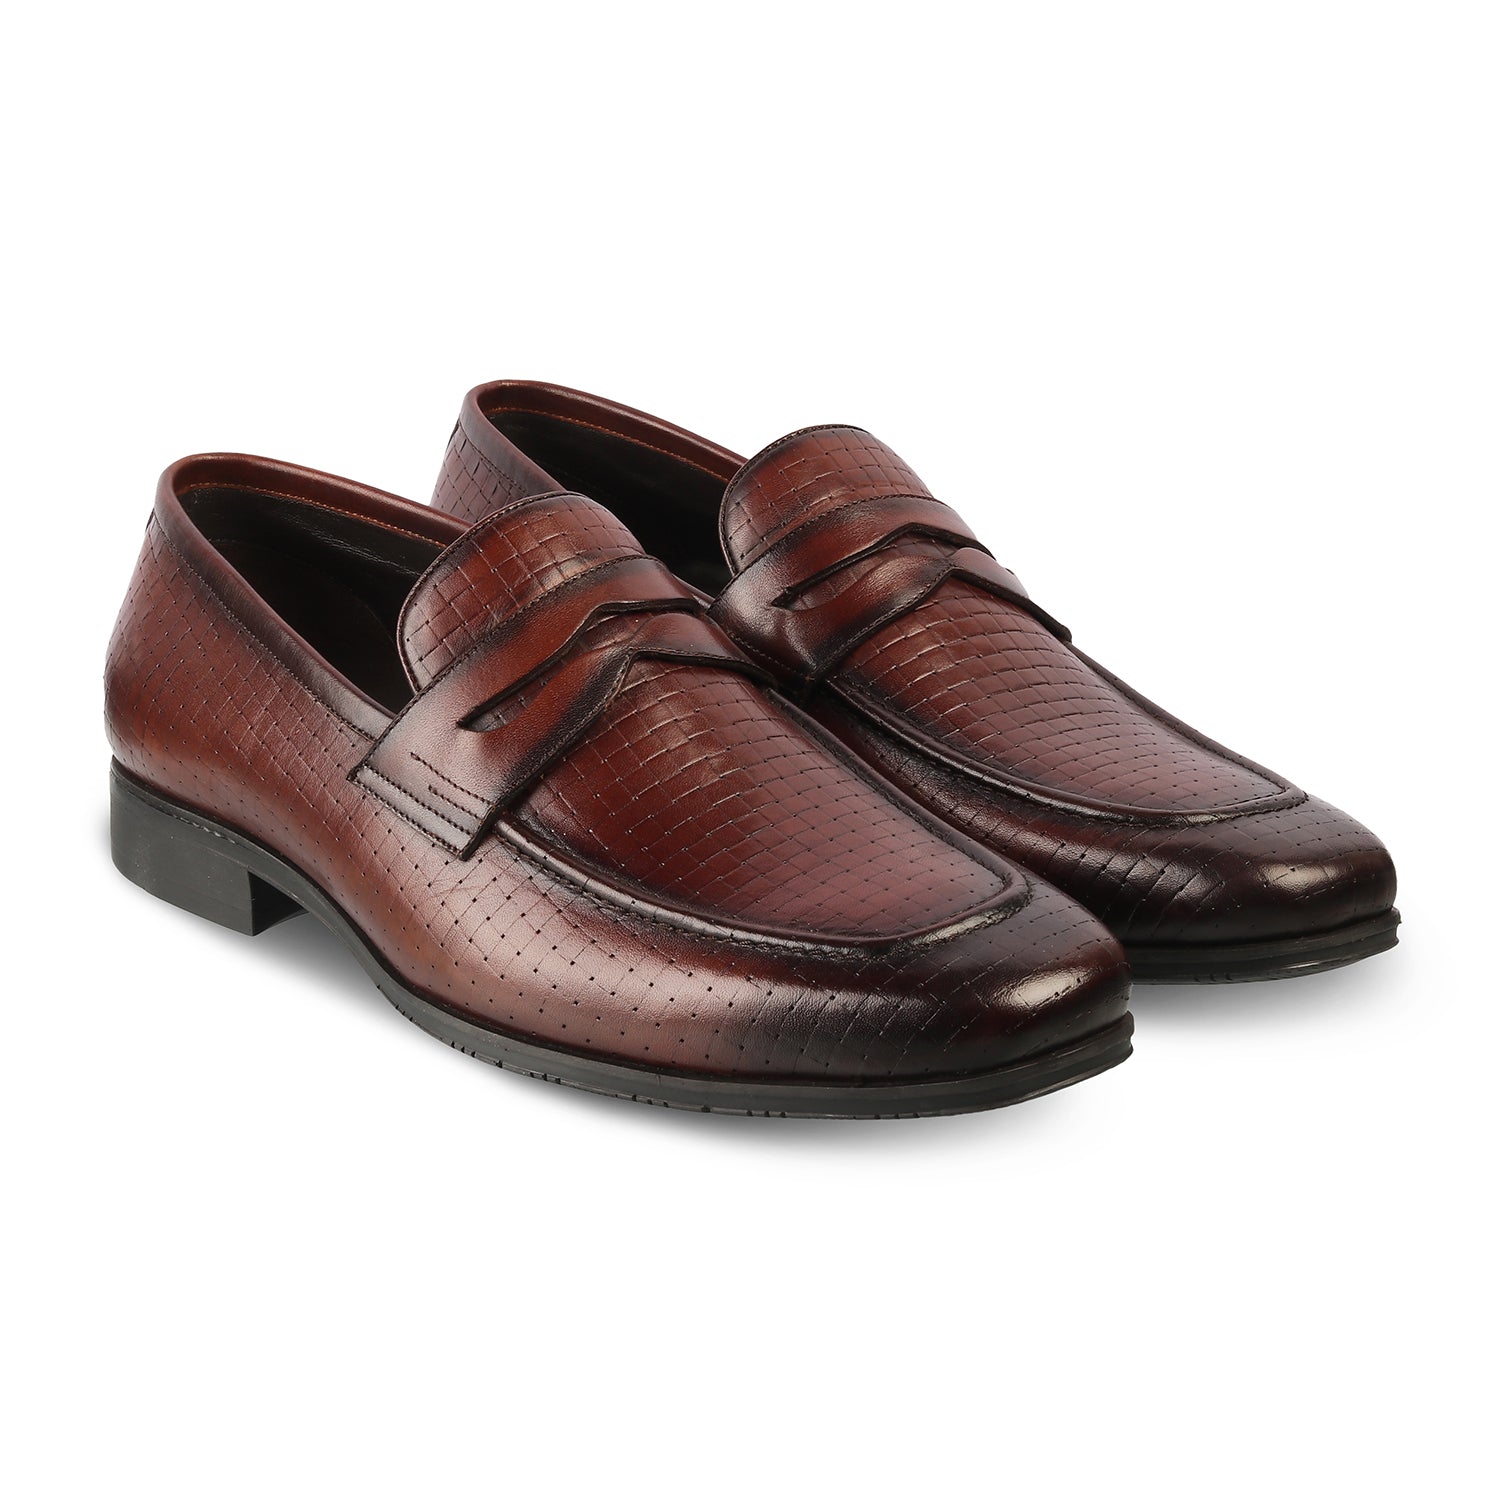 The Super Brown Men's Penny Loafers - Tresmode